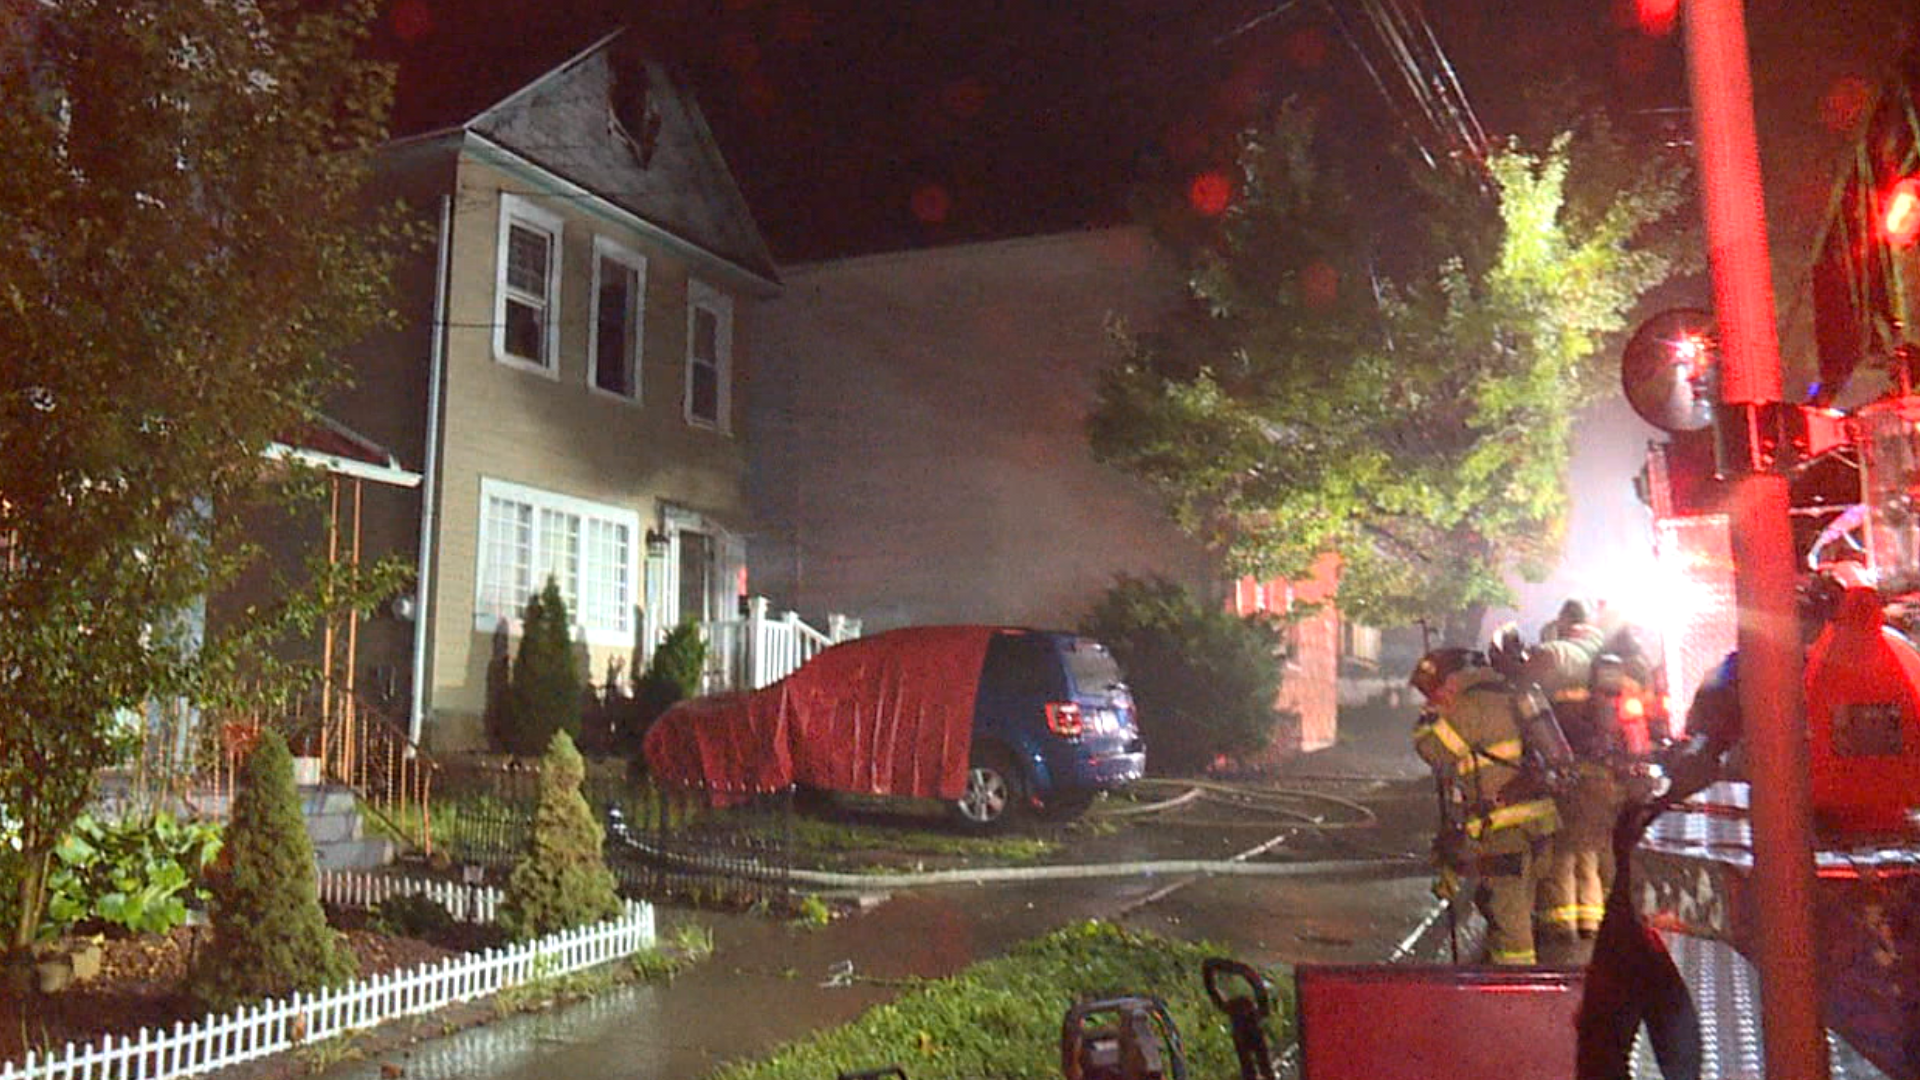 Flames damaged a home late Sunday night on Blackman Street in Wilkes-Barre.